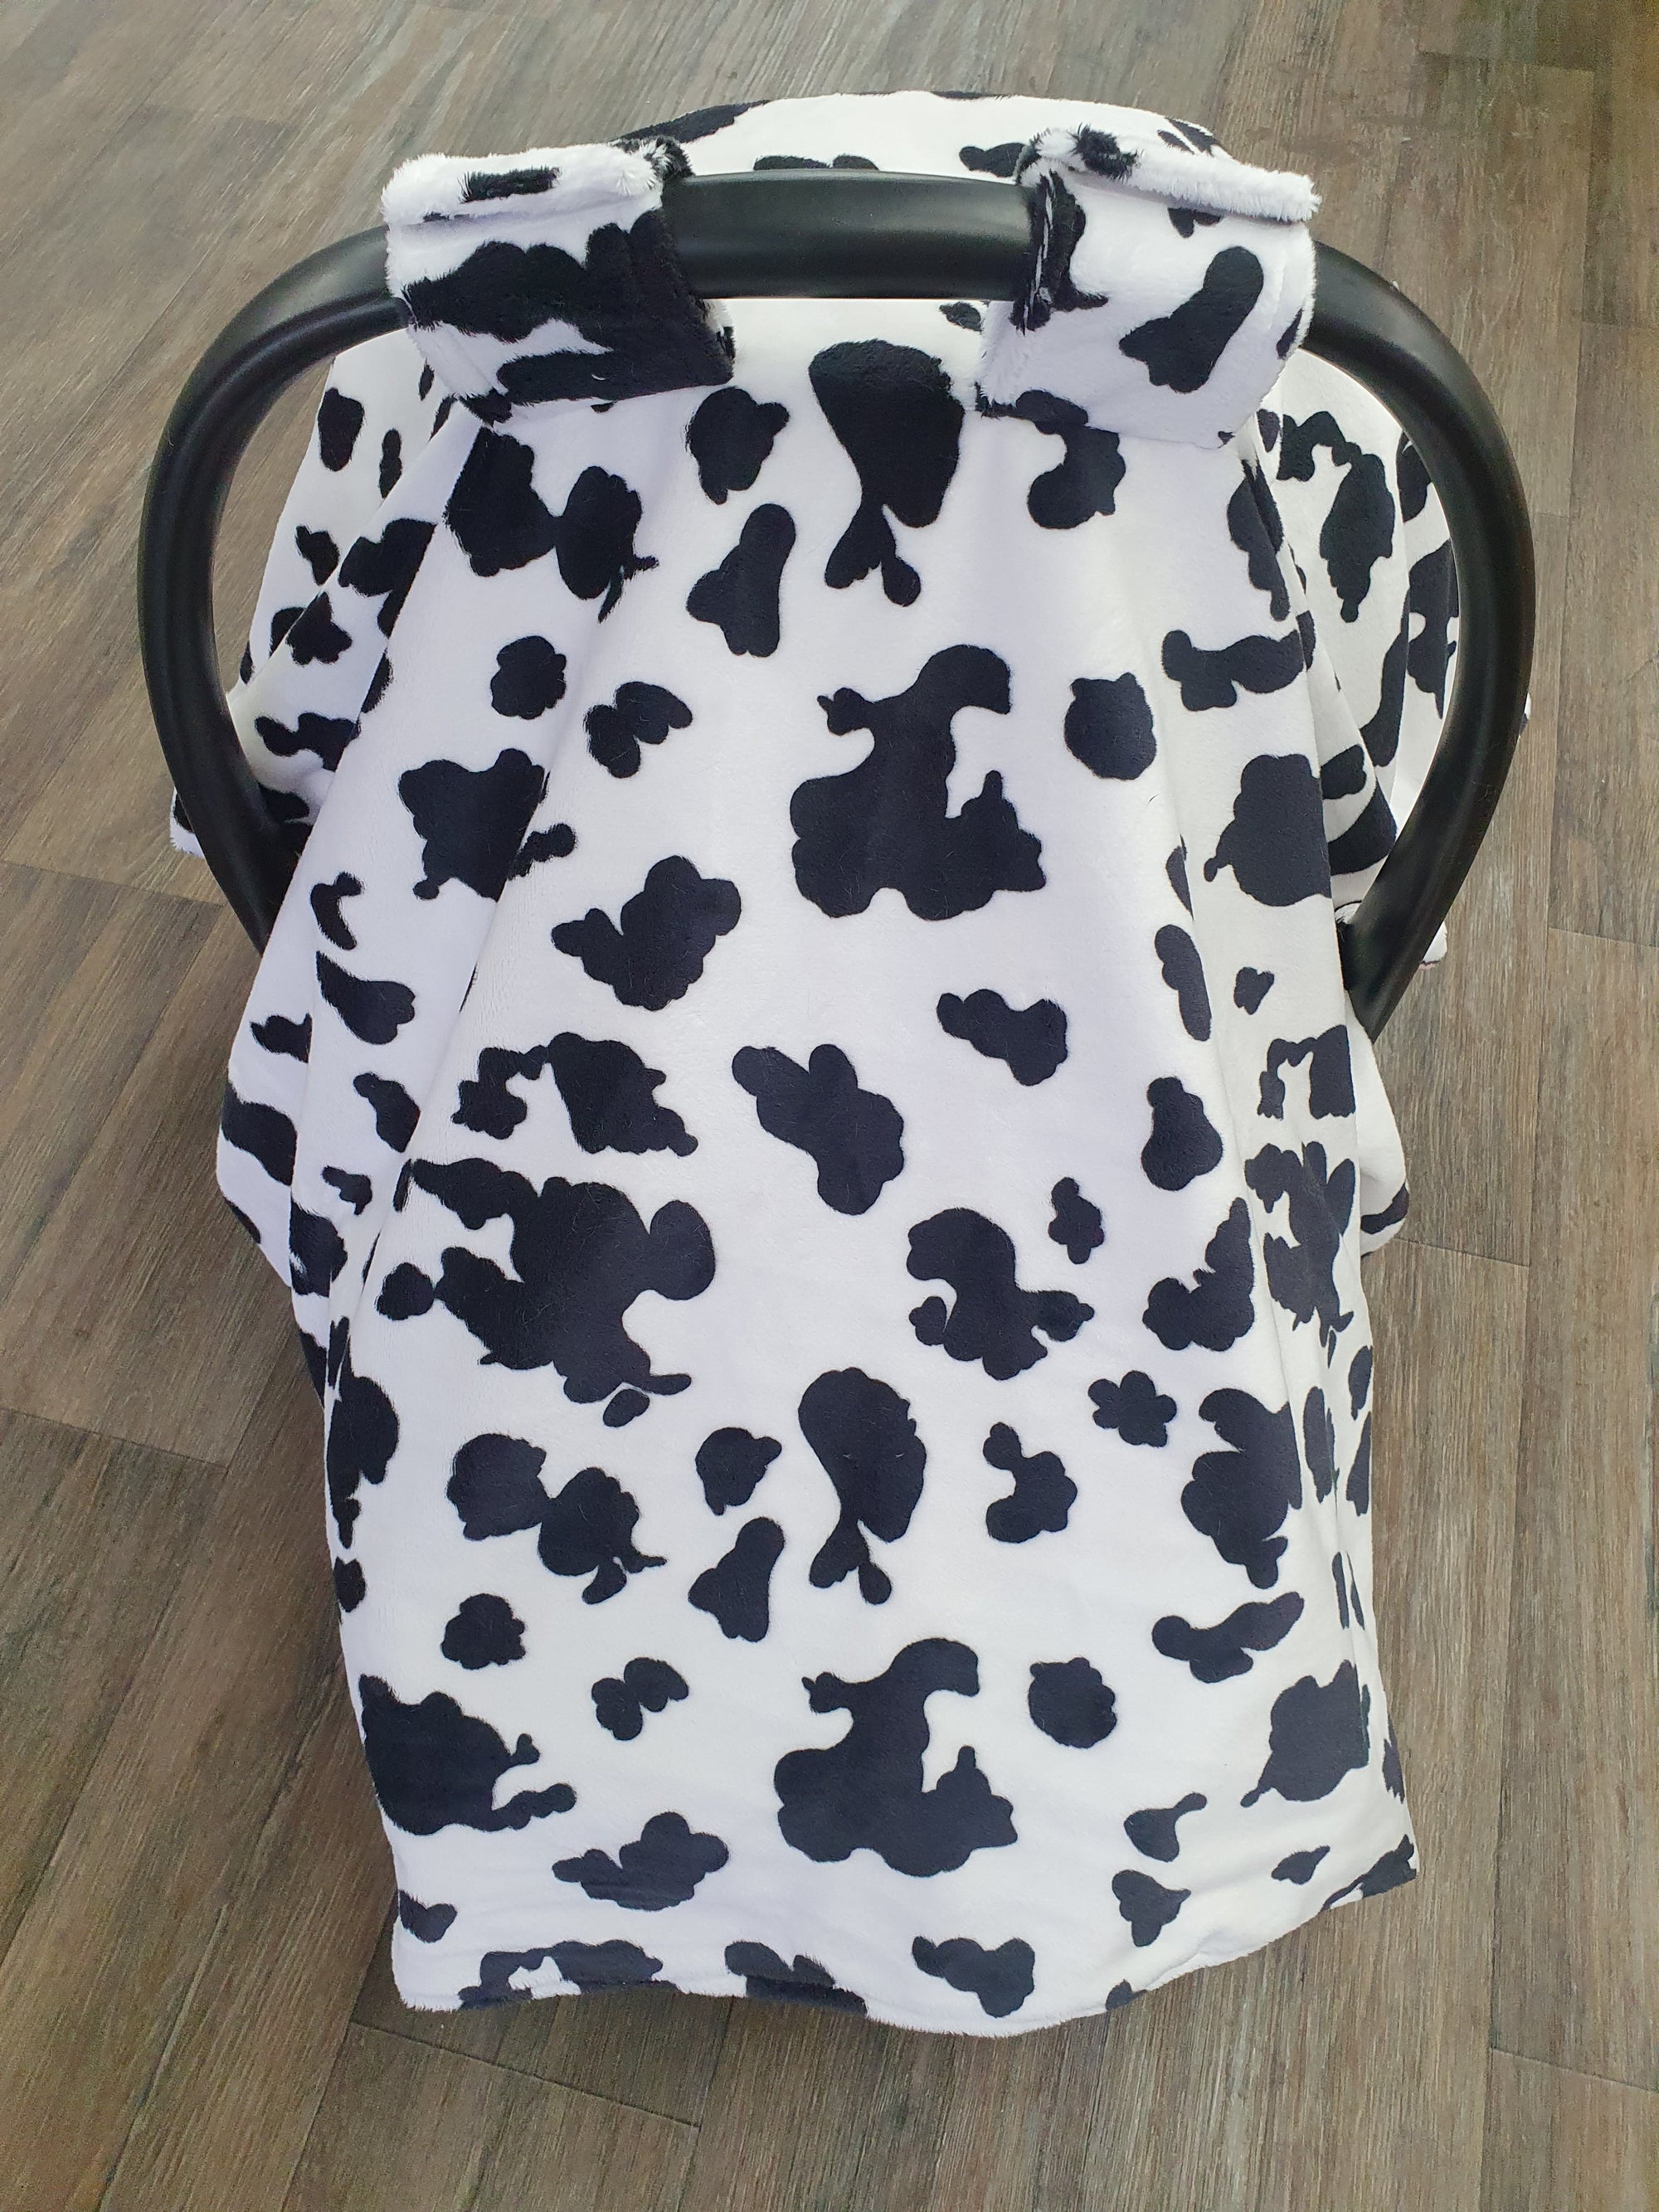 Carseat Tent - Minky Black White Cow - DBC Baby Bedding Co 